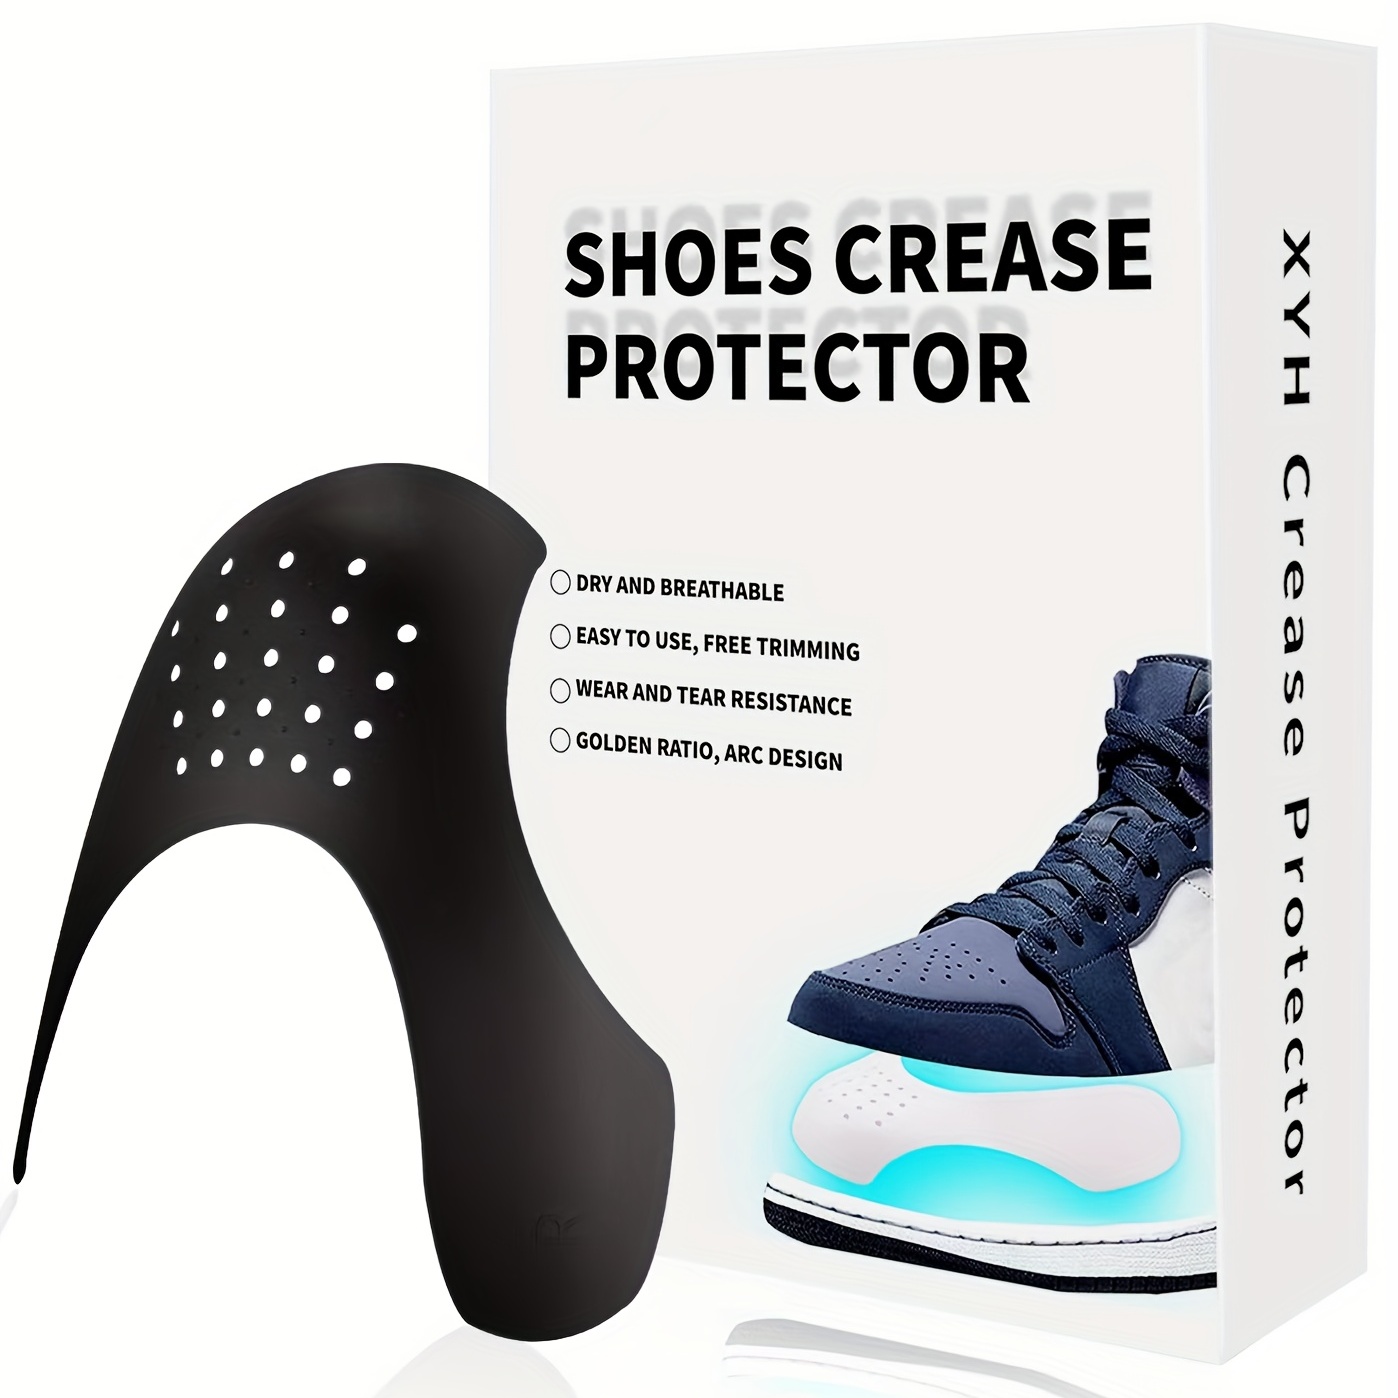 Pairs Shoe Anti Crease Brace Toe Creasing Protector Force Fields Shoes Care